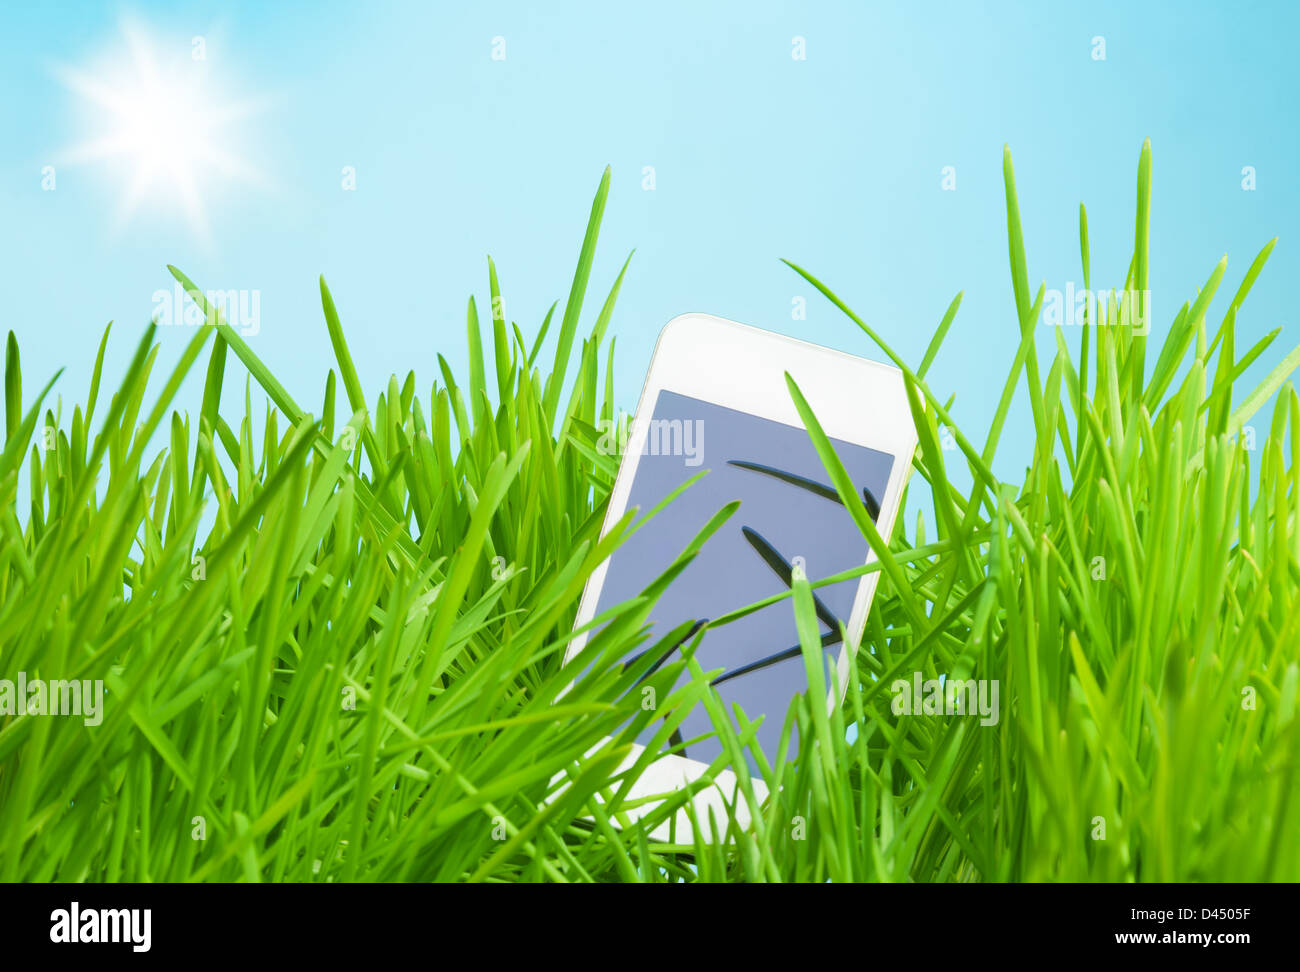 Brand new device - touch screen cell phone in grass depicting spring sale concept Stock Photo